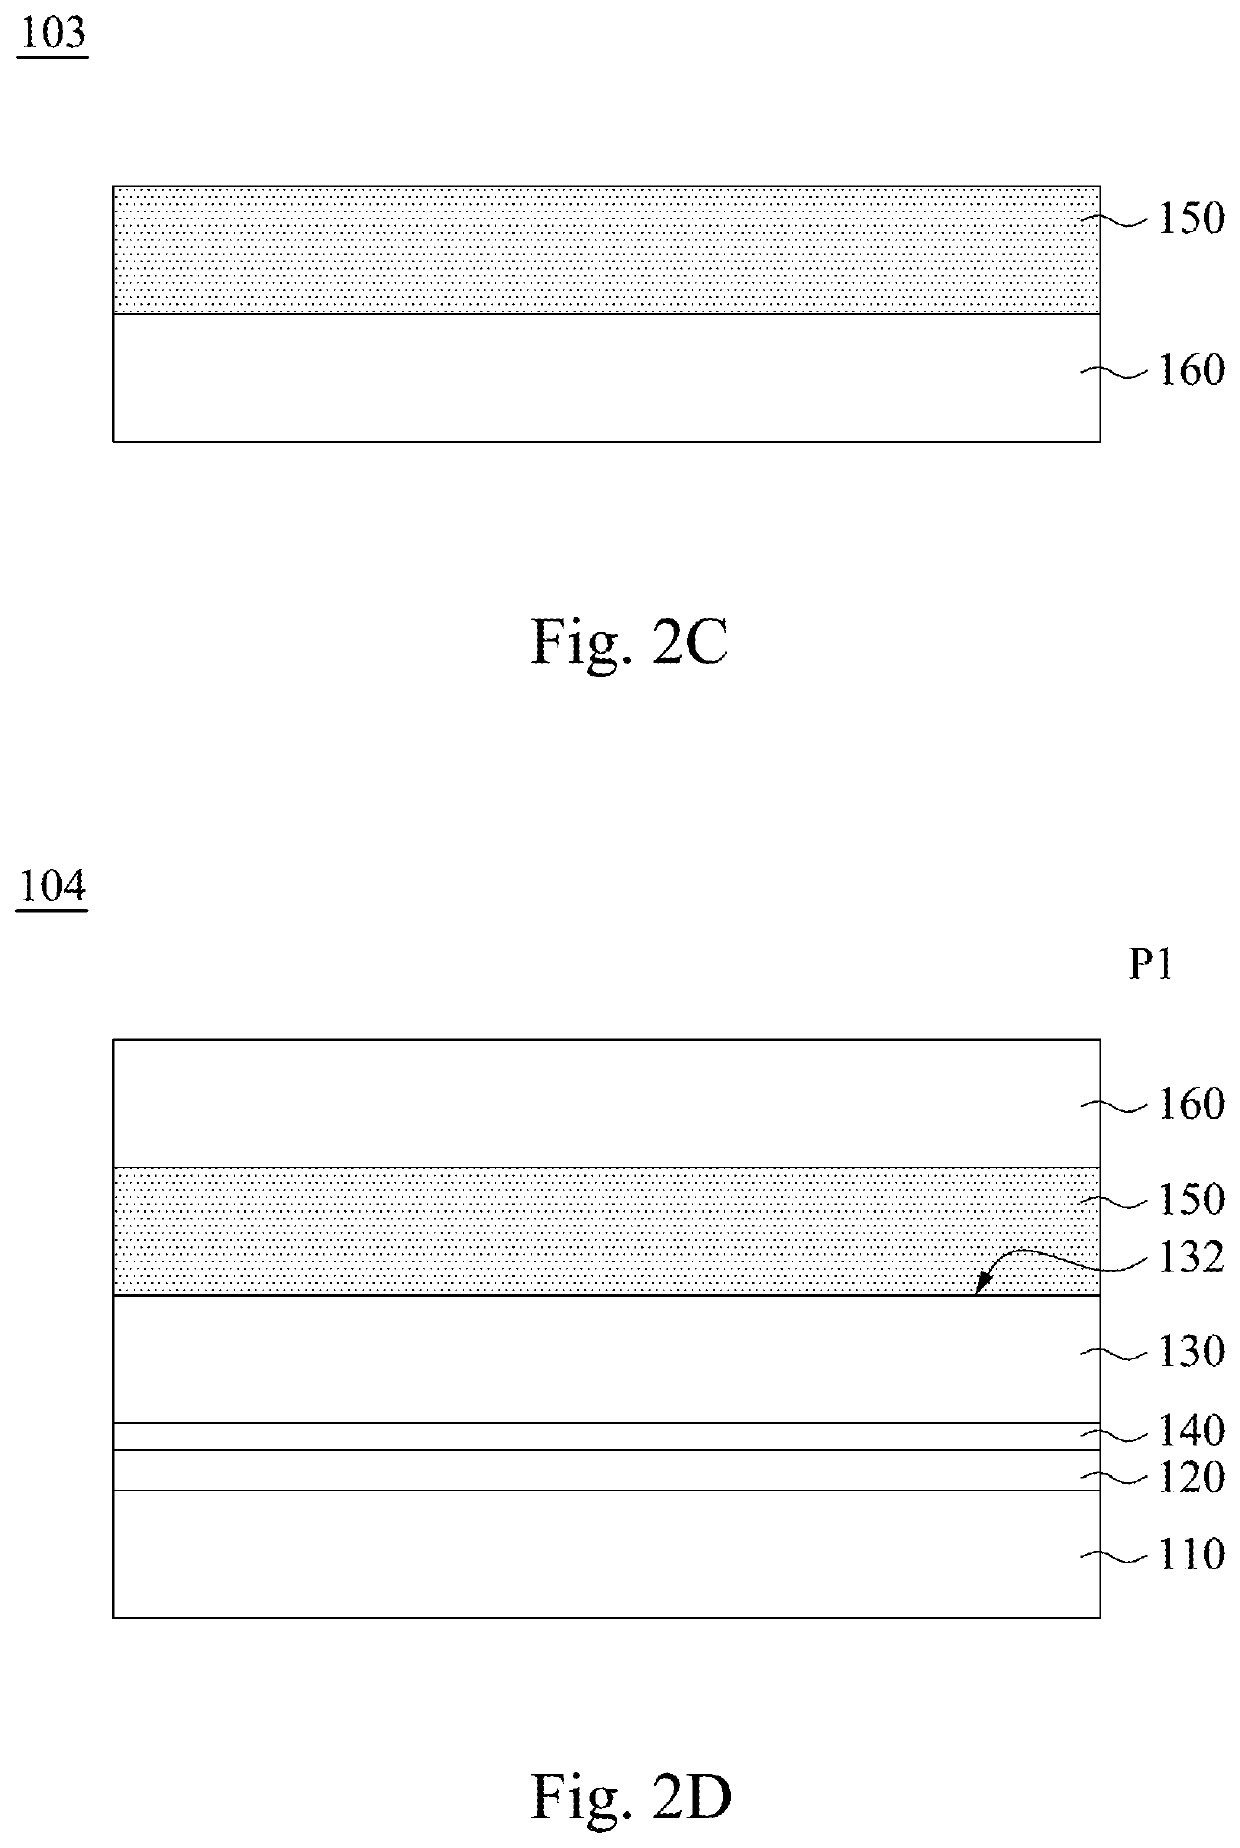 Method for minimizing average surface roughness of soft metal layer for bonding